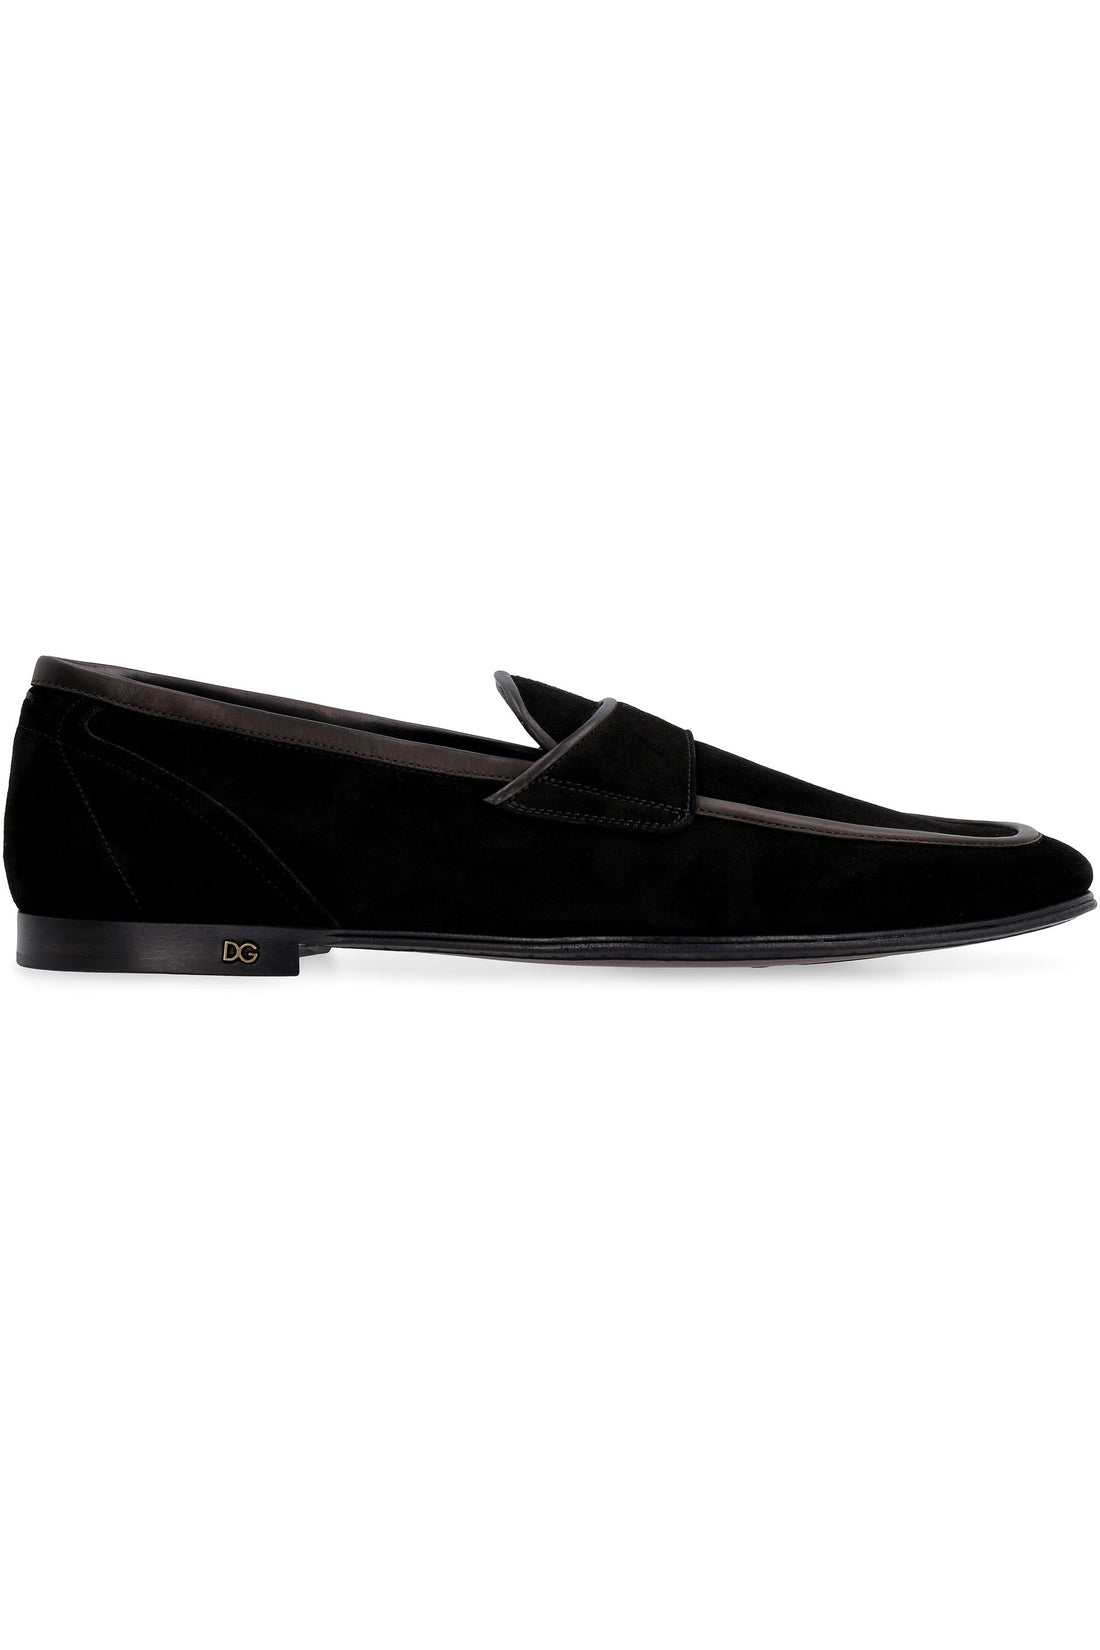 Dolce & Gabbana-OUTLET-SALE-Suede loafers-ARCHIVIST